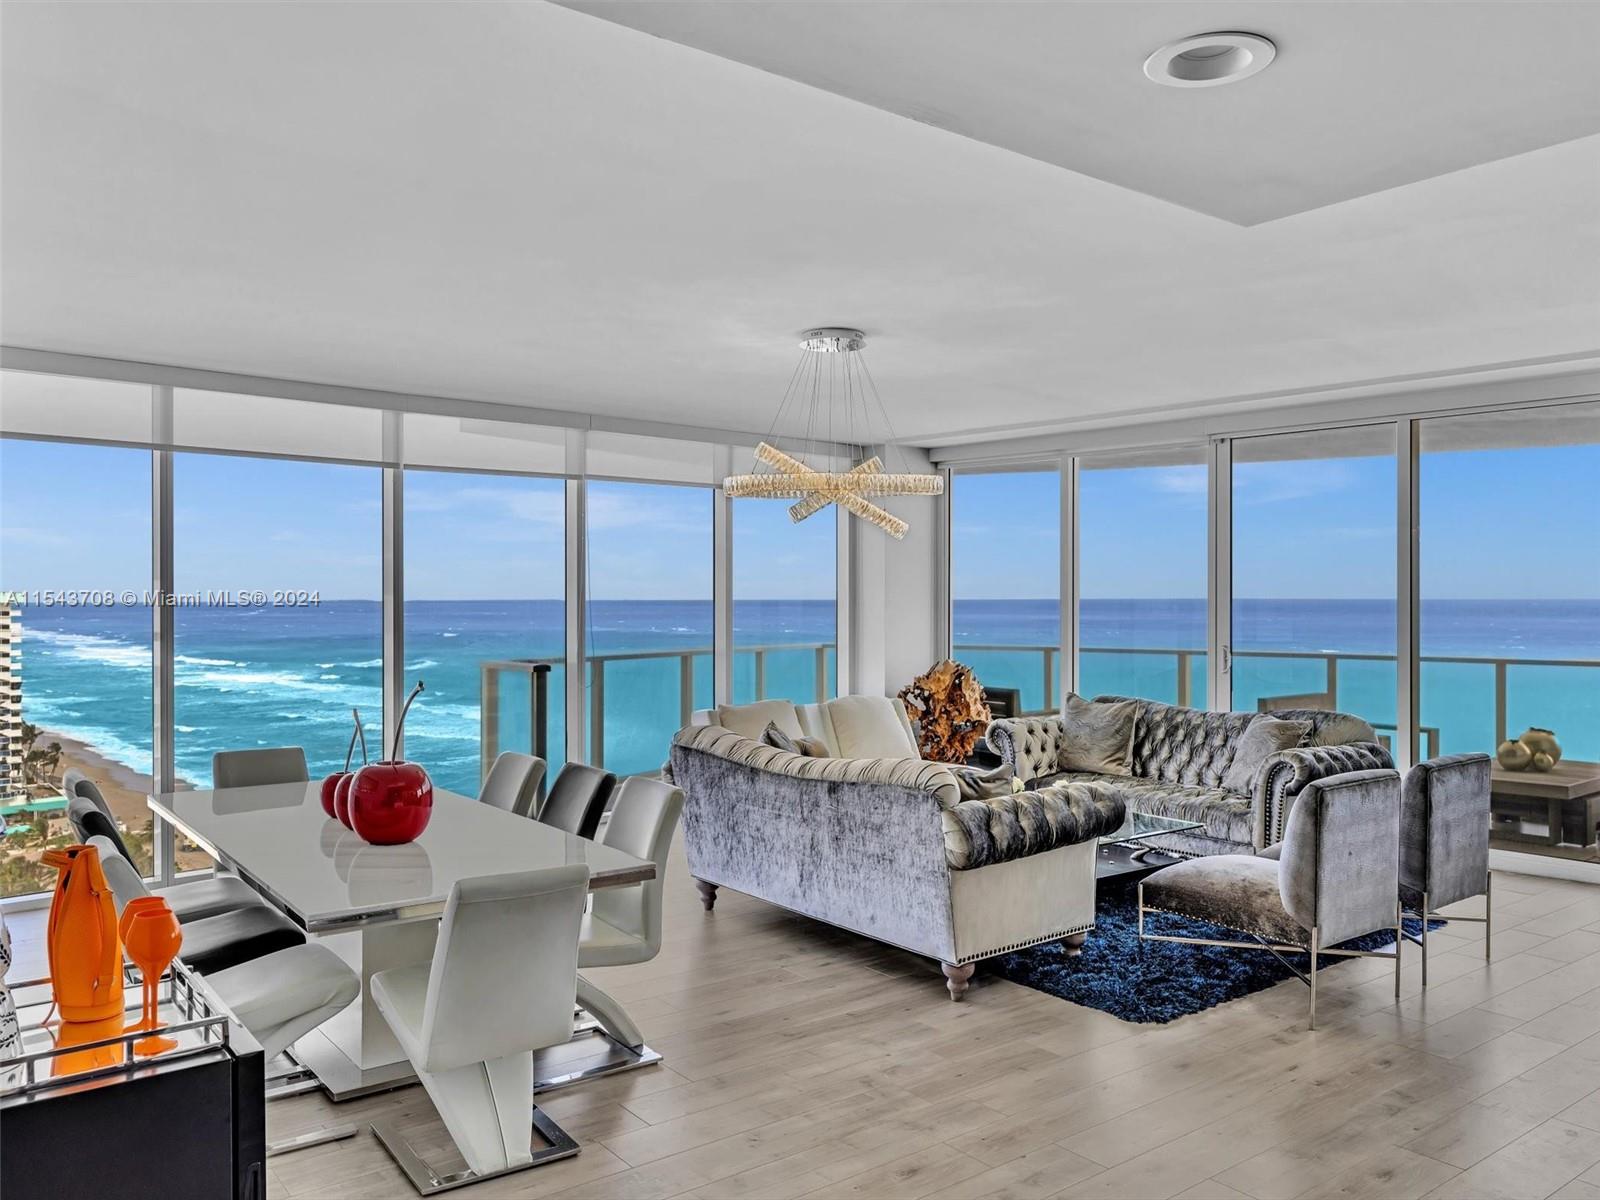 Panoramic ocean views can be found throughout this 4 bedroom. 4.5 bath oceanfront condo at the exclusive Apogee Beach. Everything in this unit is first-class including the gold standard amenities that can only be found at Apogee Beach. The residence boasts an expansive open floor plan with a wrap-around, oversized balcony, floor to ceiling impact windows, large master suite with sitting area, bonus family room and a chef's kitchen with Sub-Zero and Wolf appliances. Only two units per floor!Apogee Beach amenities include valet parking, butler service, resort-style pool, state of the art fitness center with massage rooms and sauna, club room, children/ teen room, and private beach access with attendants.

Please call/text LA to schedule a showing.